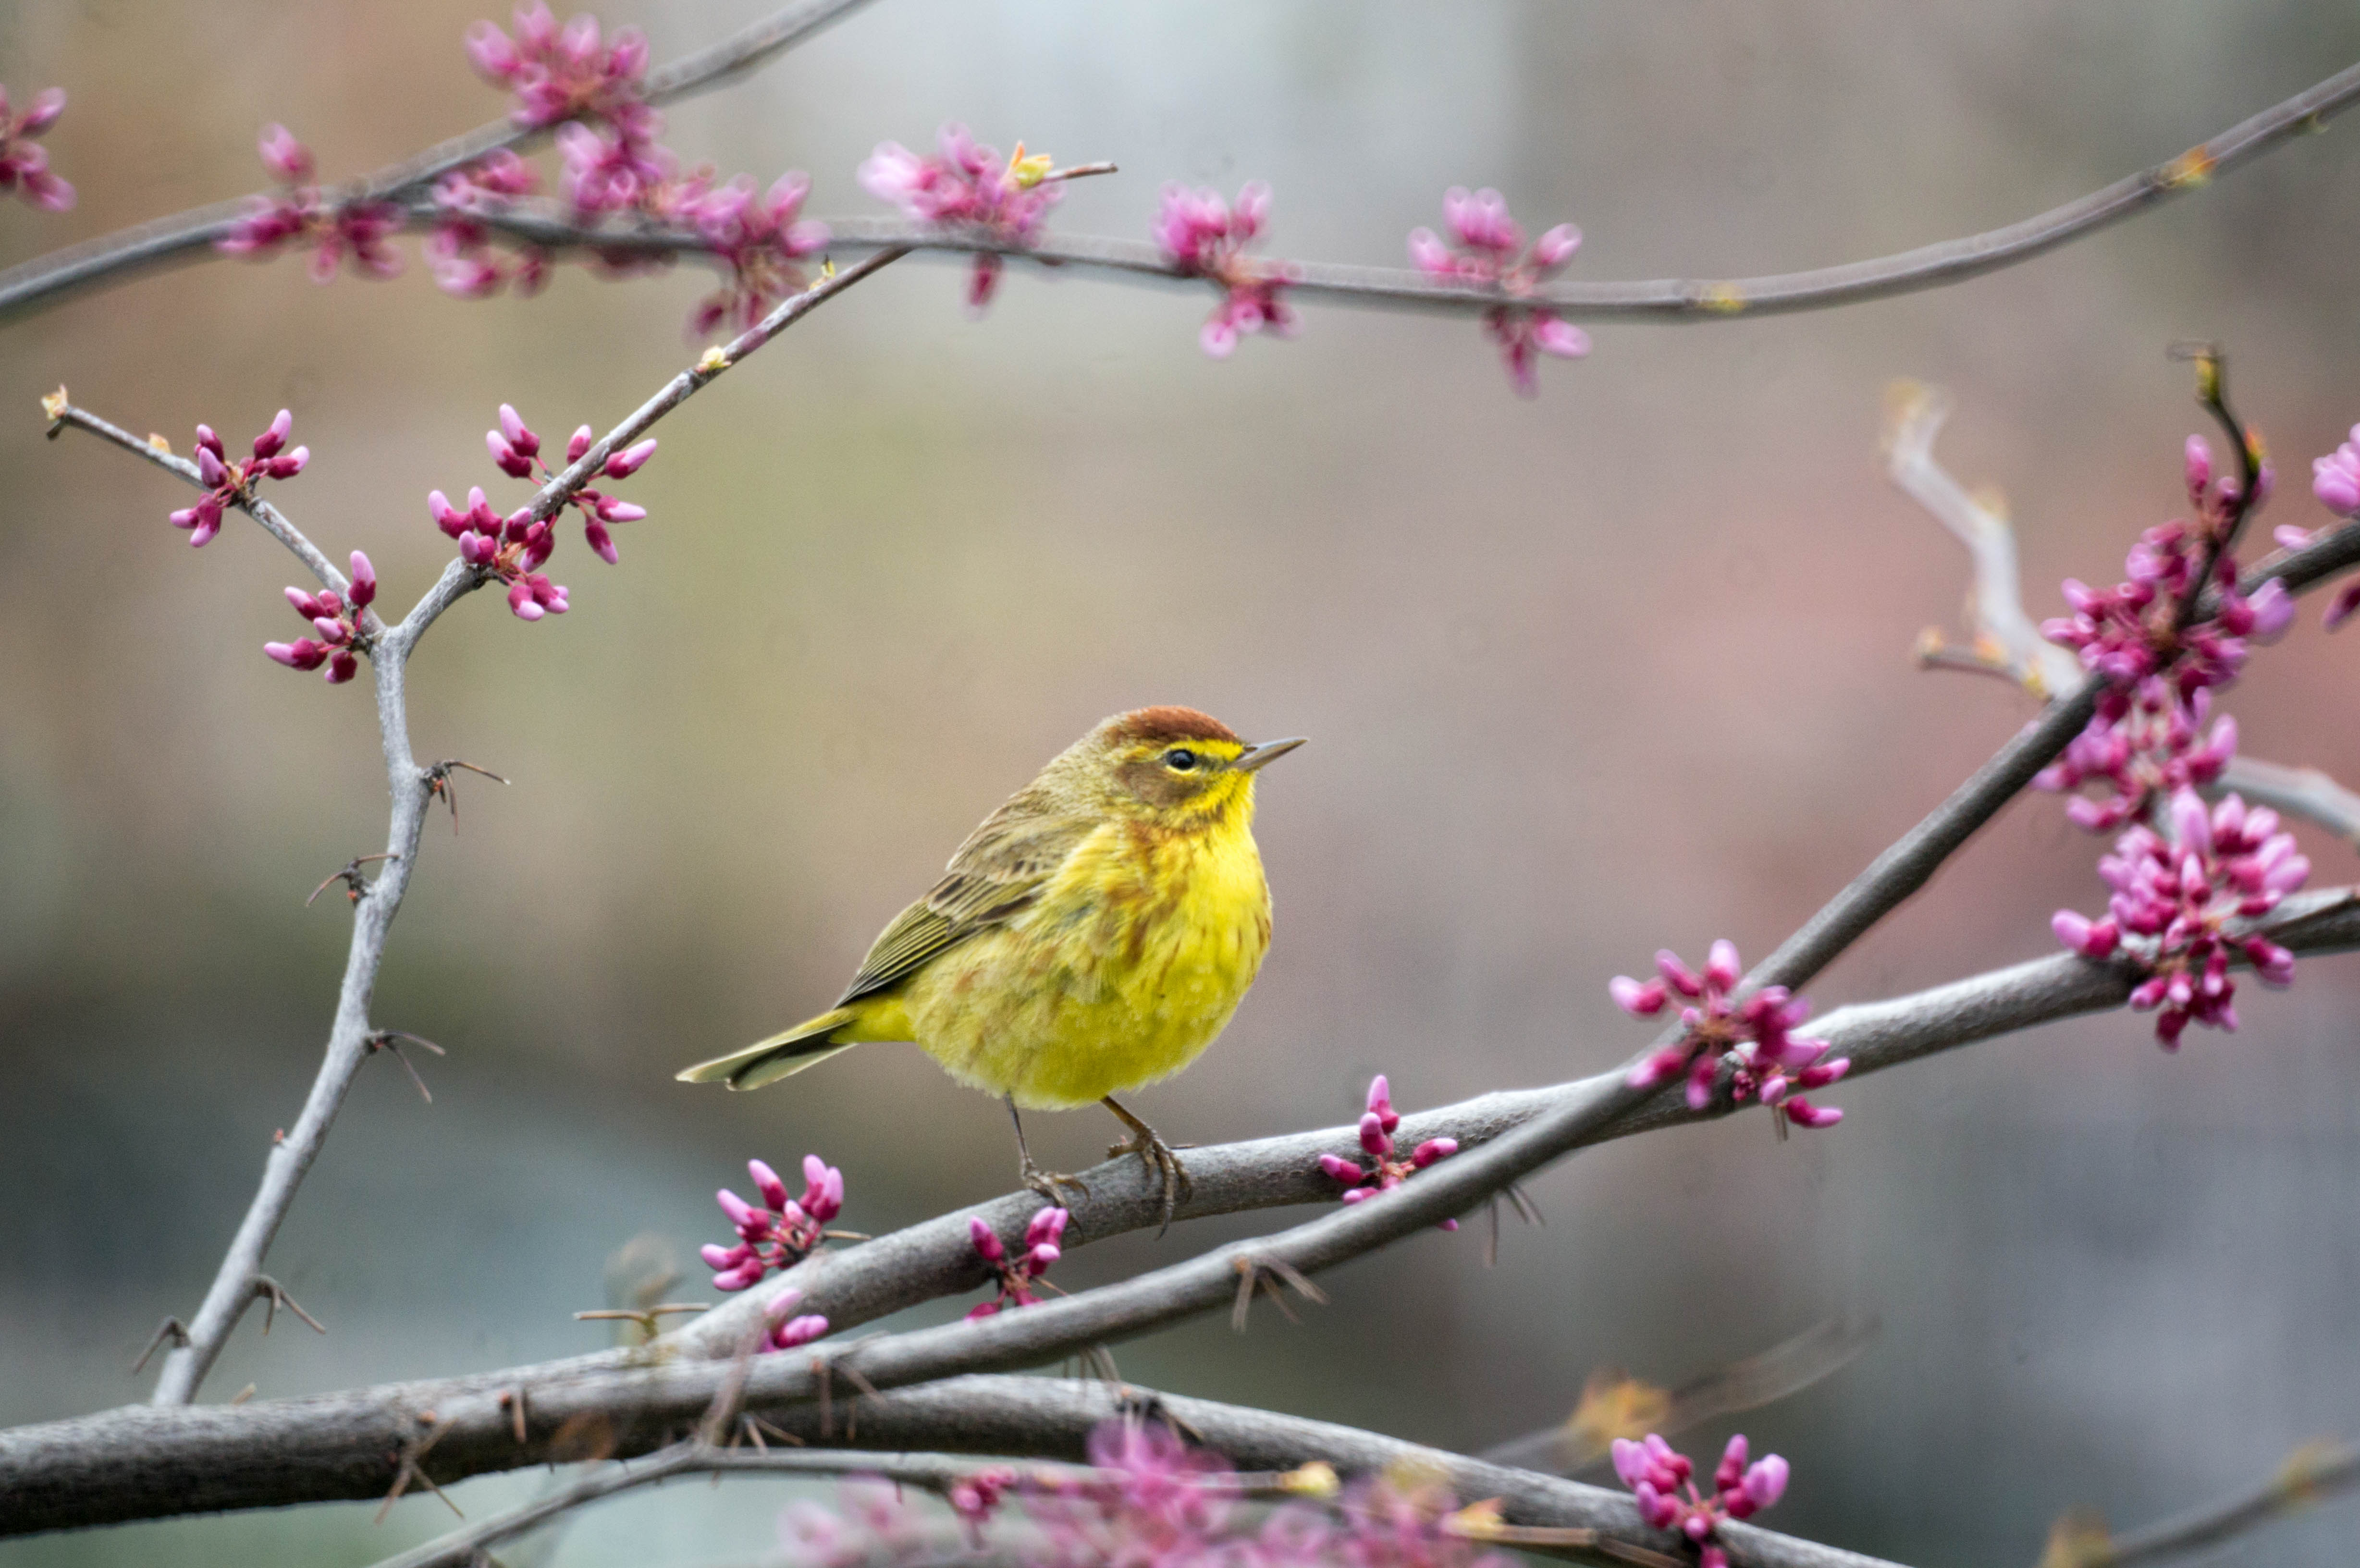 A Palm Warbler visits Green-Wood Cemetery in the springtime. Photo: Will Pollard/CC BY-ND 2.0